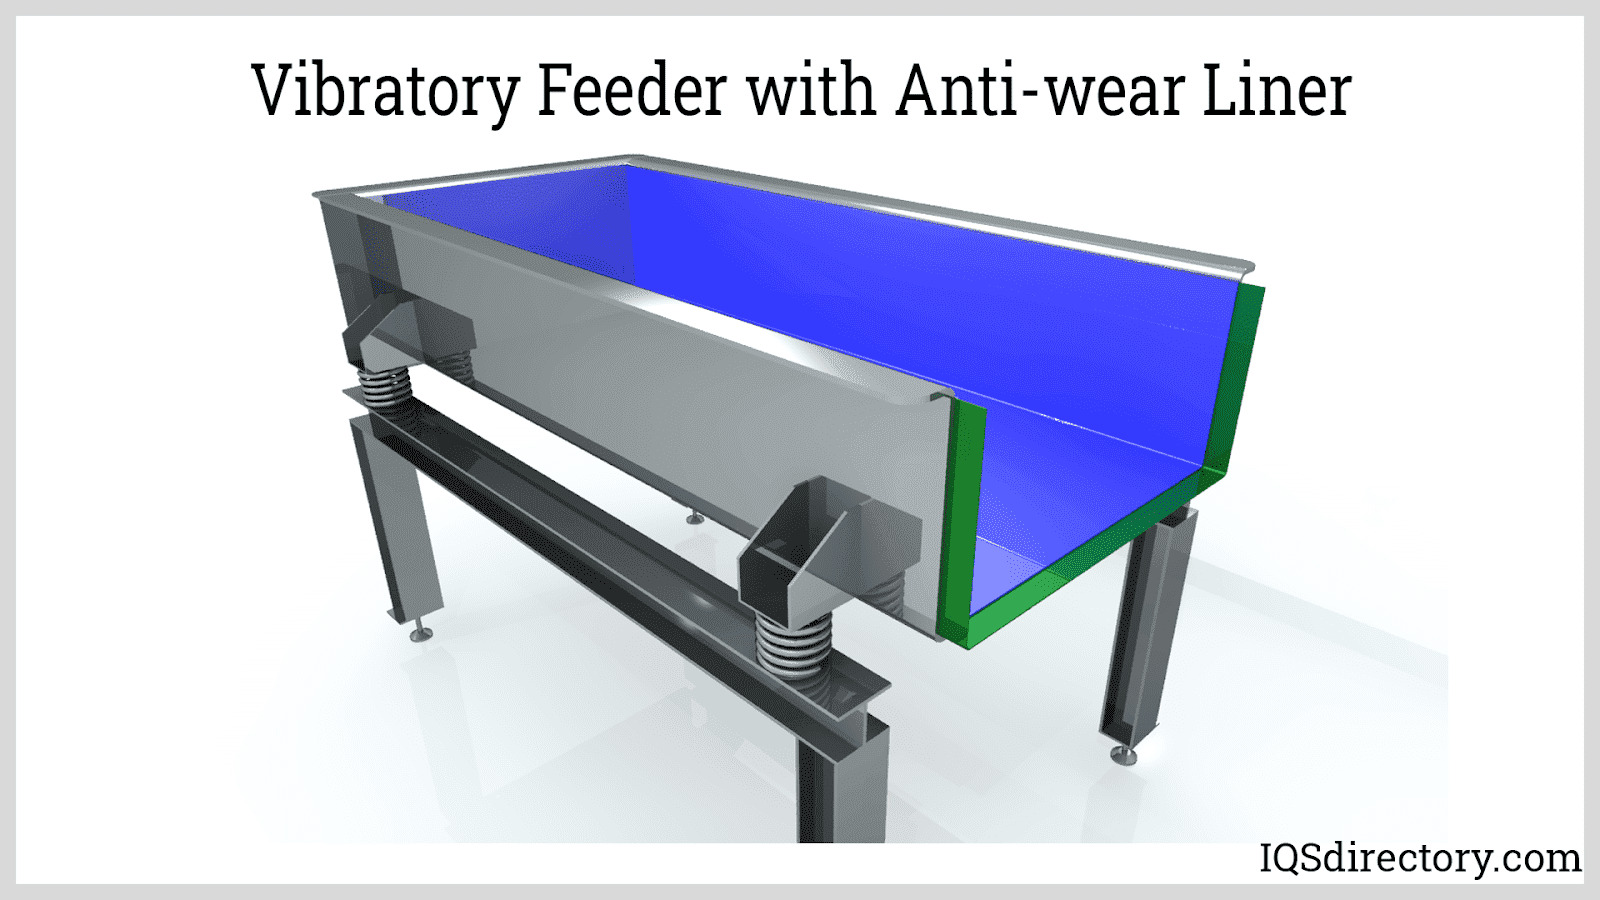 Vibratory Feeder with Anti-wear Liner